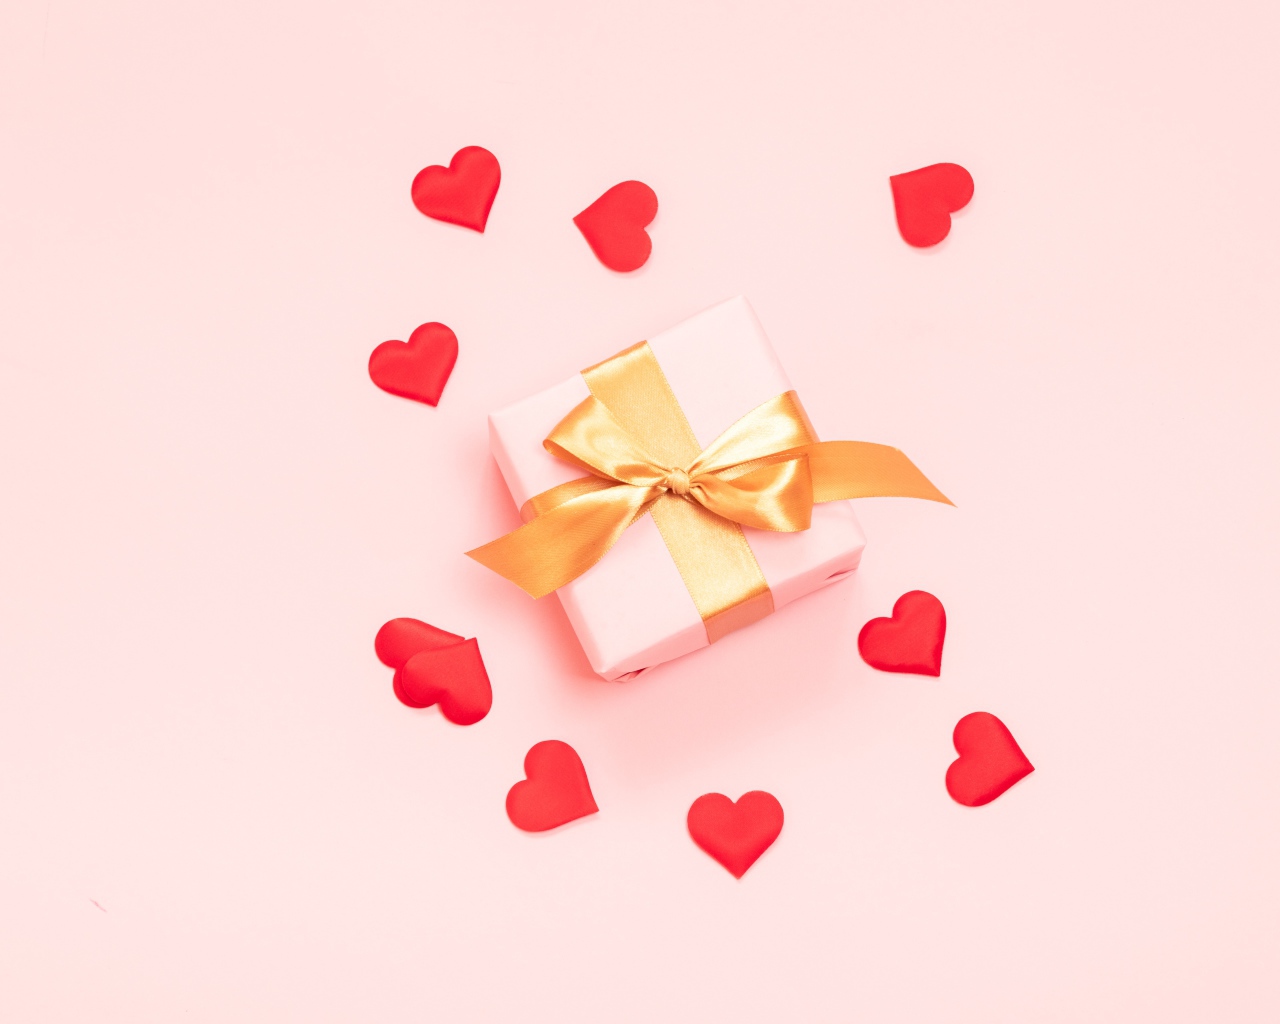 Gift with bow on a pink background with red hearts.